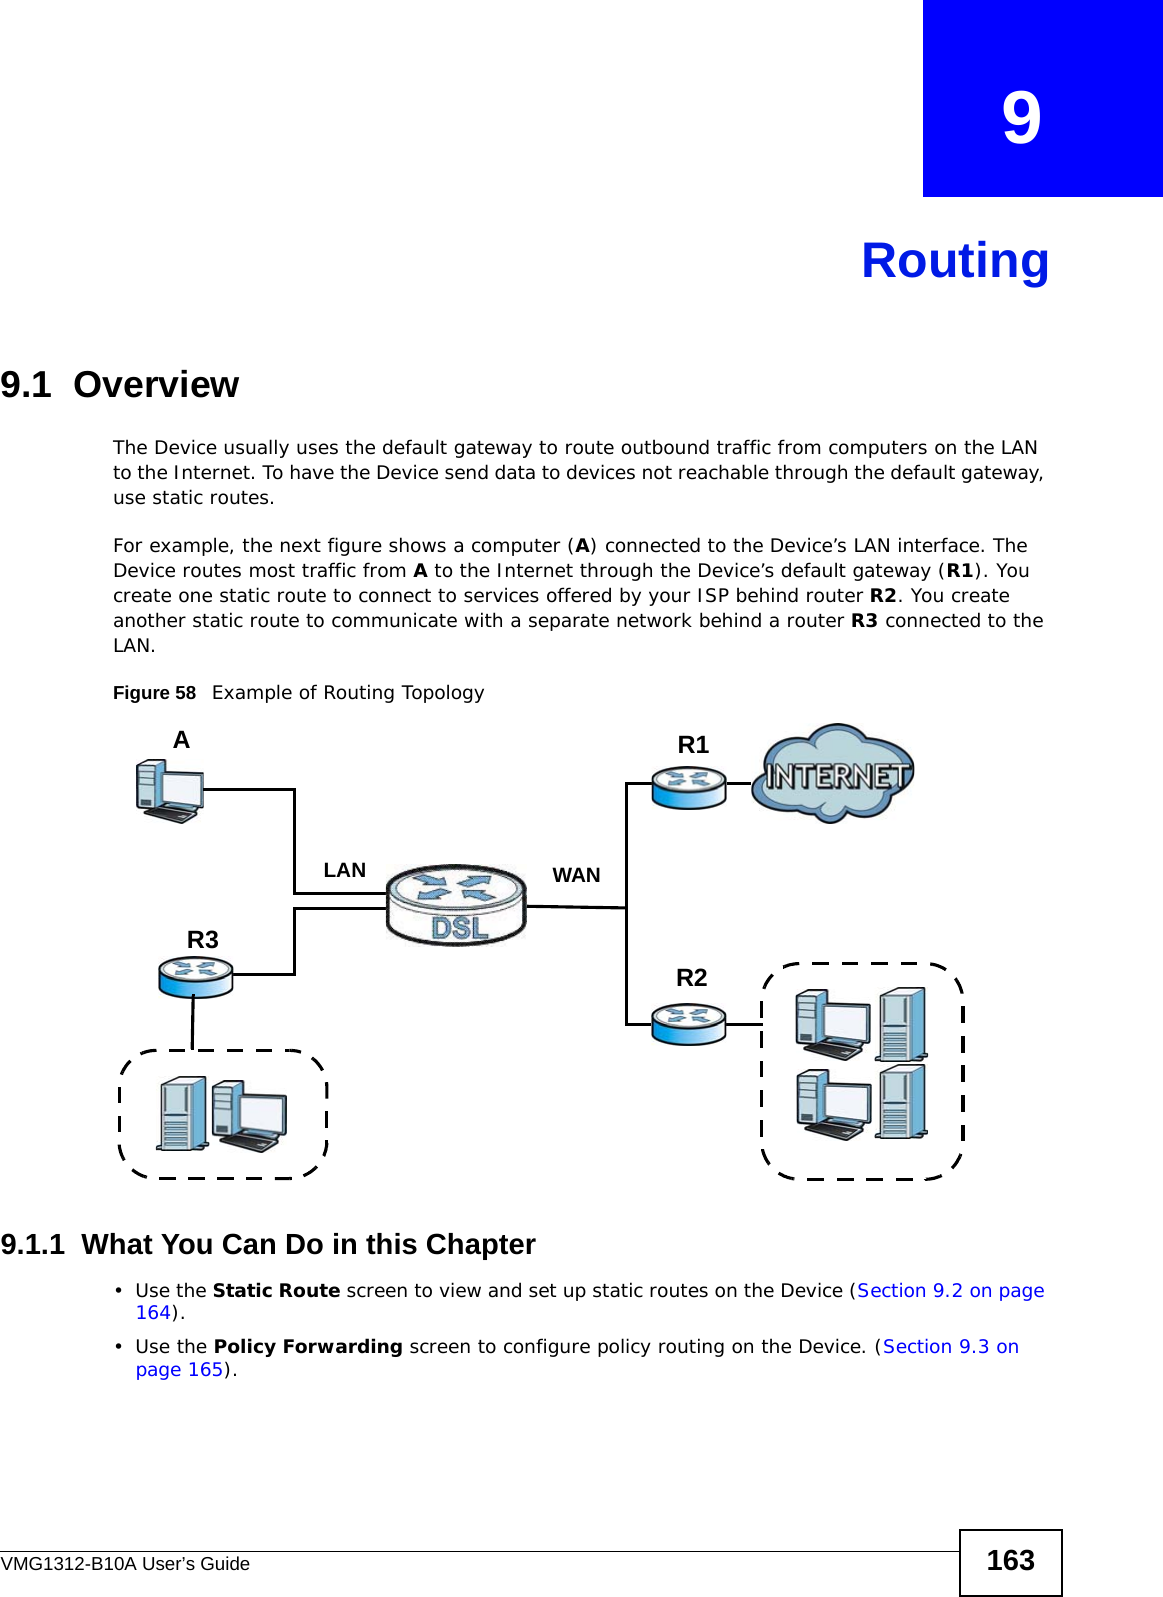 VMG1312-B10A User’s Guide 163CHAPTER   9Routing9.1  Overview The Device usually uses the default gateway to route outbound traffic from computers on the LAN to the Internet. To have the Device send data to devices not reachable through the default gateway, use static routes.For example, the next figure shows a computer (A) connected to the Device’s LAN interface. The Device routes most traffic from A to the Internet through the Device’s default gateway (R1). You create one static route to connect to services offered by your ISP behind router R2. You create another static route to communicate with a separate network behind a router R3 connected to the LAN.   Figure 58   Example of Routing Topology9.1.1  What You Can Do in this Chapter•Use the Static Route screen to view and set up static routes on the Device (Section 9.2 on page 164).•Use the Policy Forwarding screen to configure policy routing on the Device. (Section 9.3 on page 165). WANR1R2AR3LAN